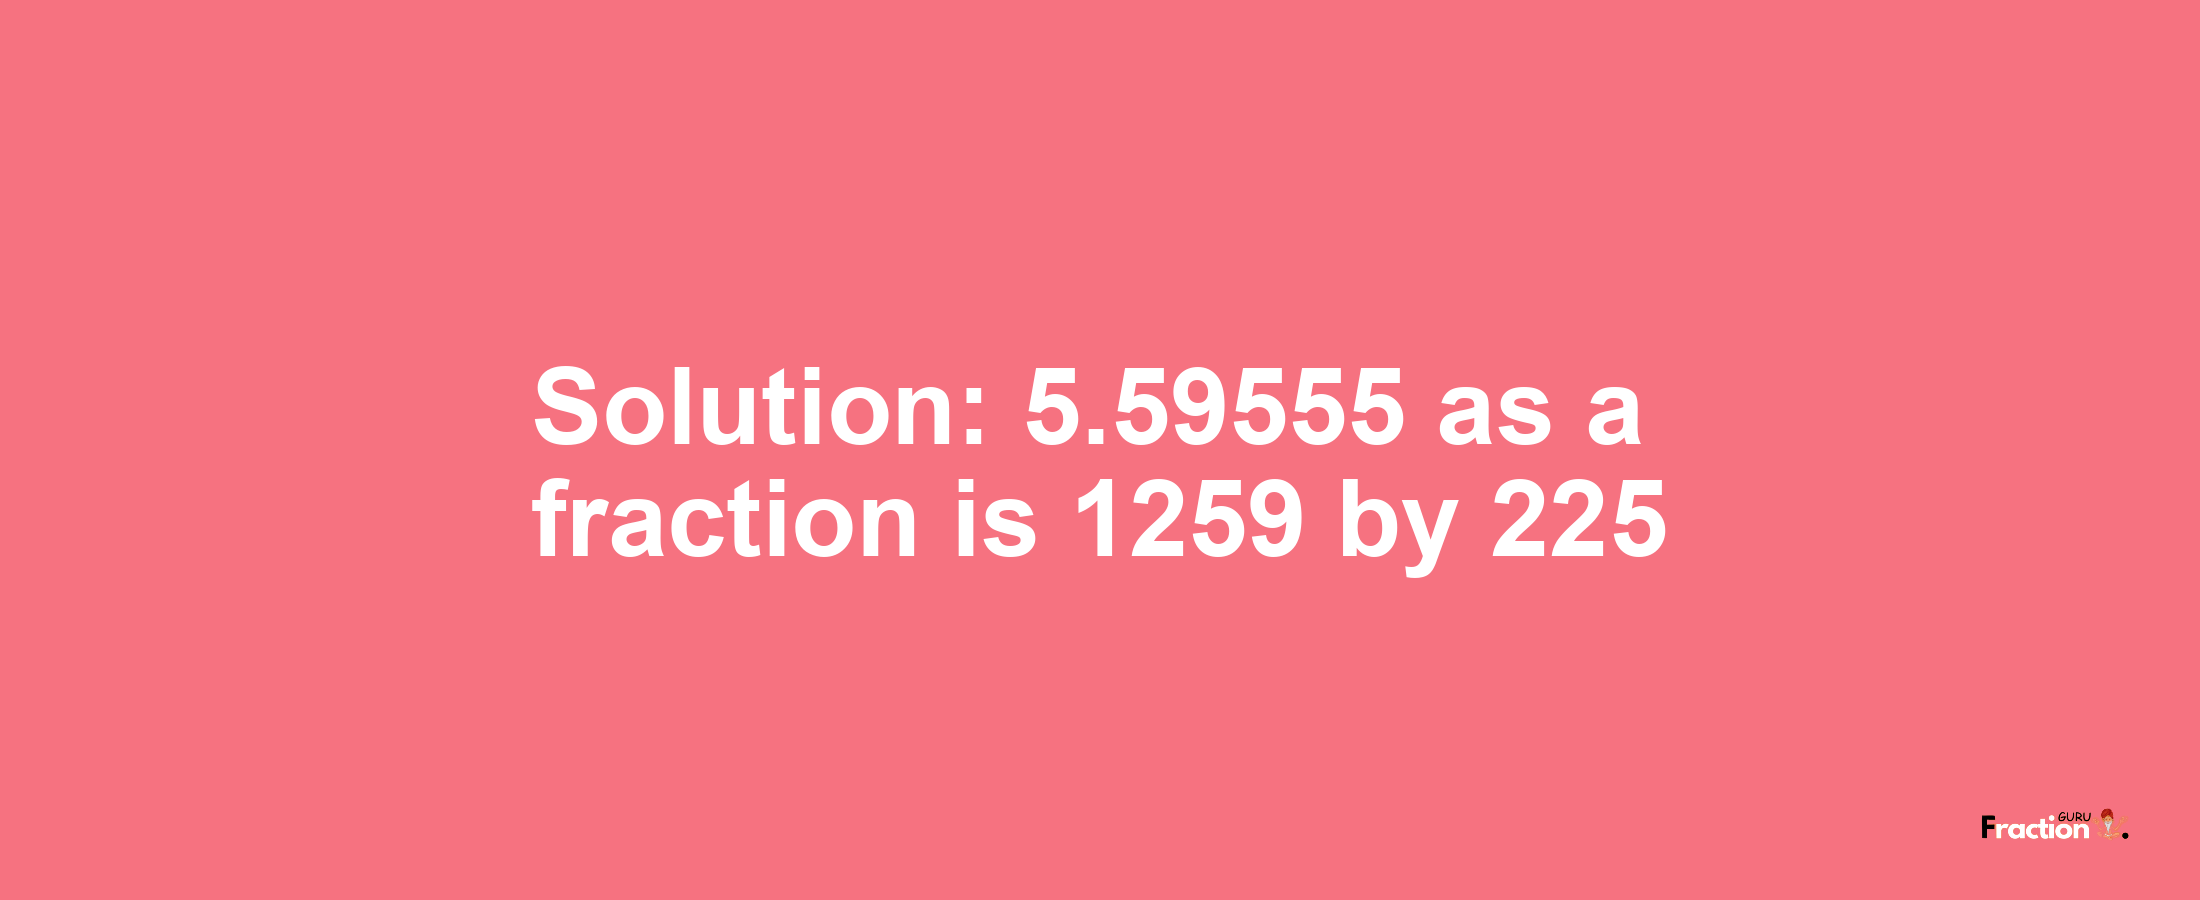 Solution:5.59555 as a fraction is 1259/225